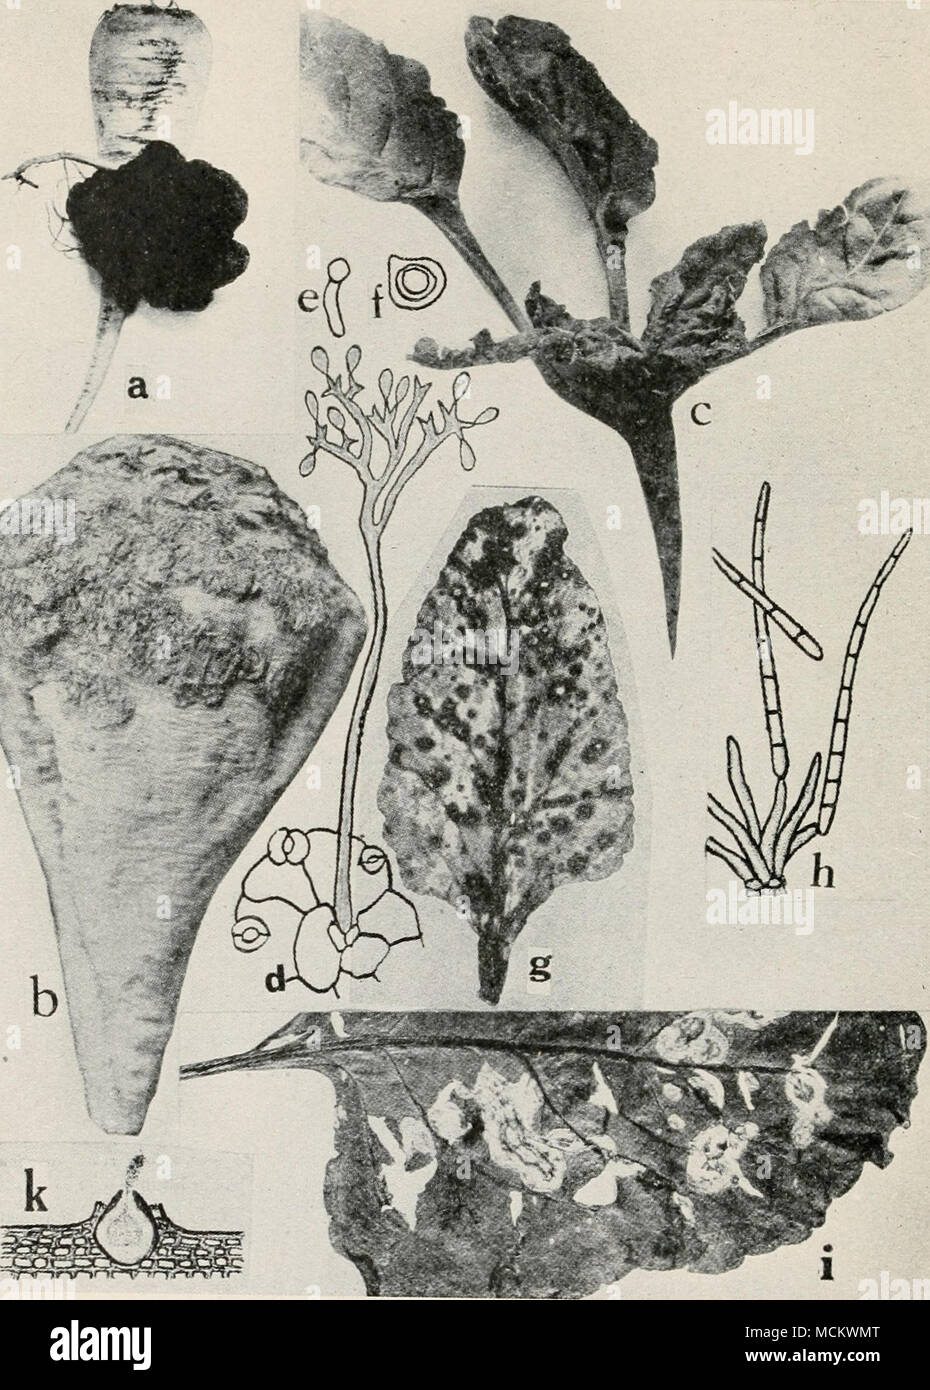 . Fig. 20. Beet Diseases. a. Crown gall, b. scab c. downy mildew, d. Conidiophore of Peroyiospora schachlii arising from a stomate of an infected beet leaf, e. germinating zoospore of P. schach- •/• °°?P.O'&quot;e &quot;f ^- schachlii, g. Cercospora leaf spot (after Halsted), h. conidiophore and conidia of Cercospora belicola (after Duggar), i. Phoma leaf spot (after Pool and McKay), k. pycnidium of Phoma belce (after T. Johnson) {d.-f. after PriUieux). Stock Photo